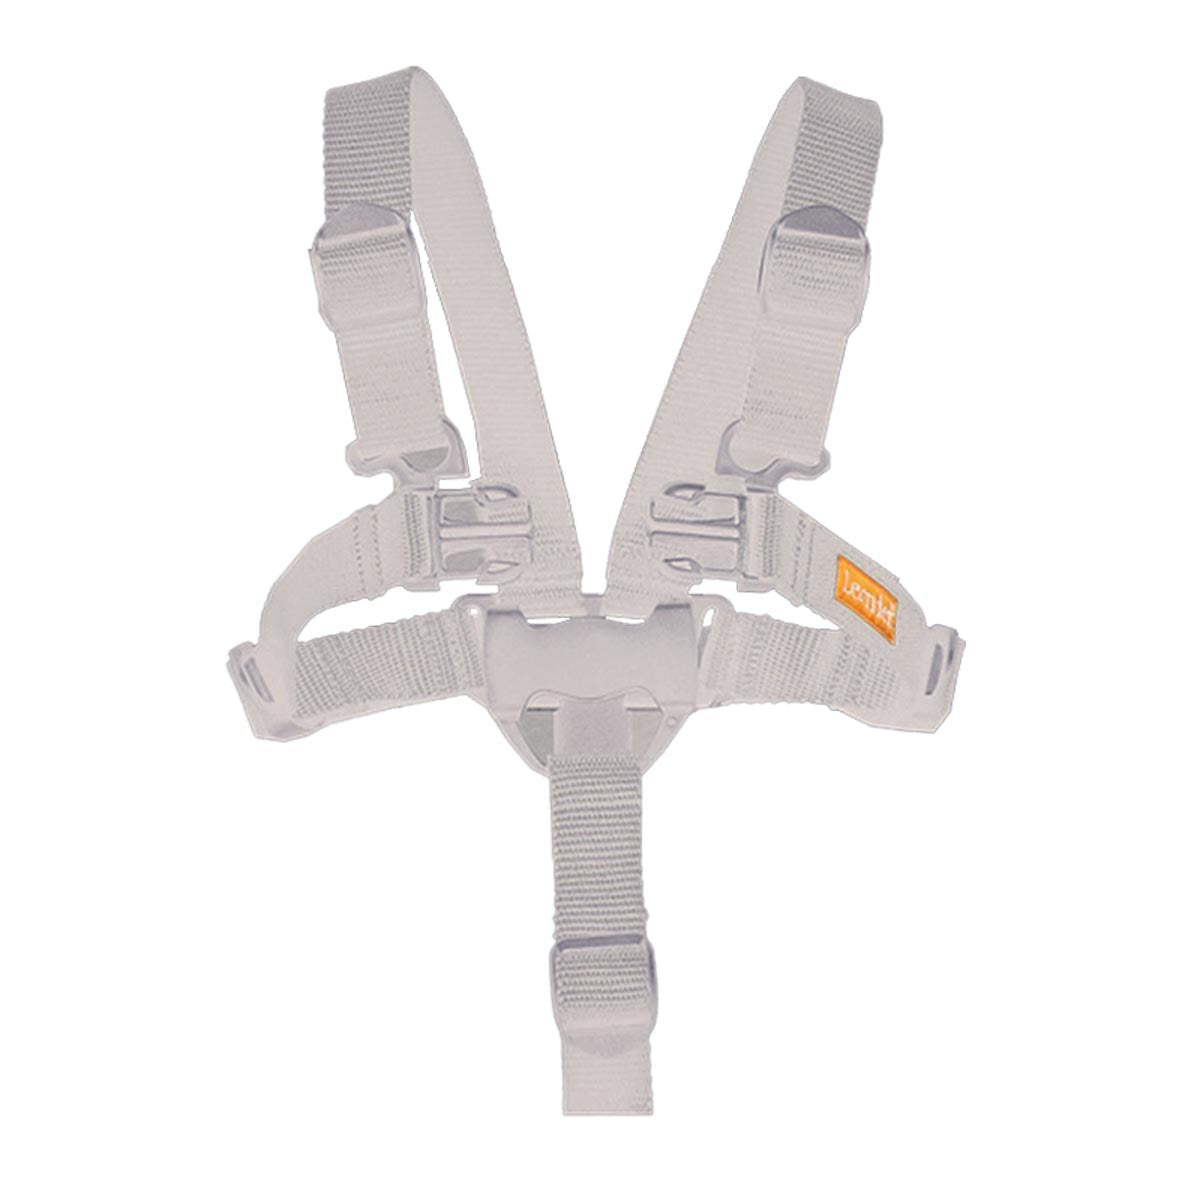 Leander Classic High Chair Safety Harness